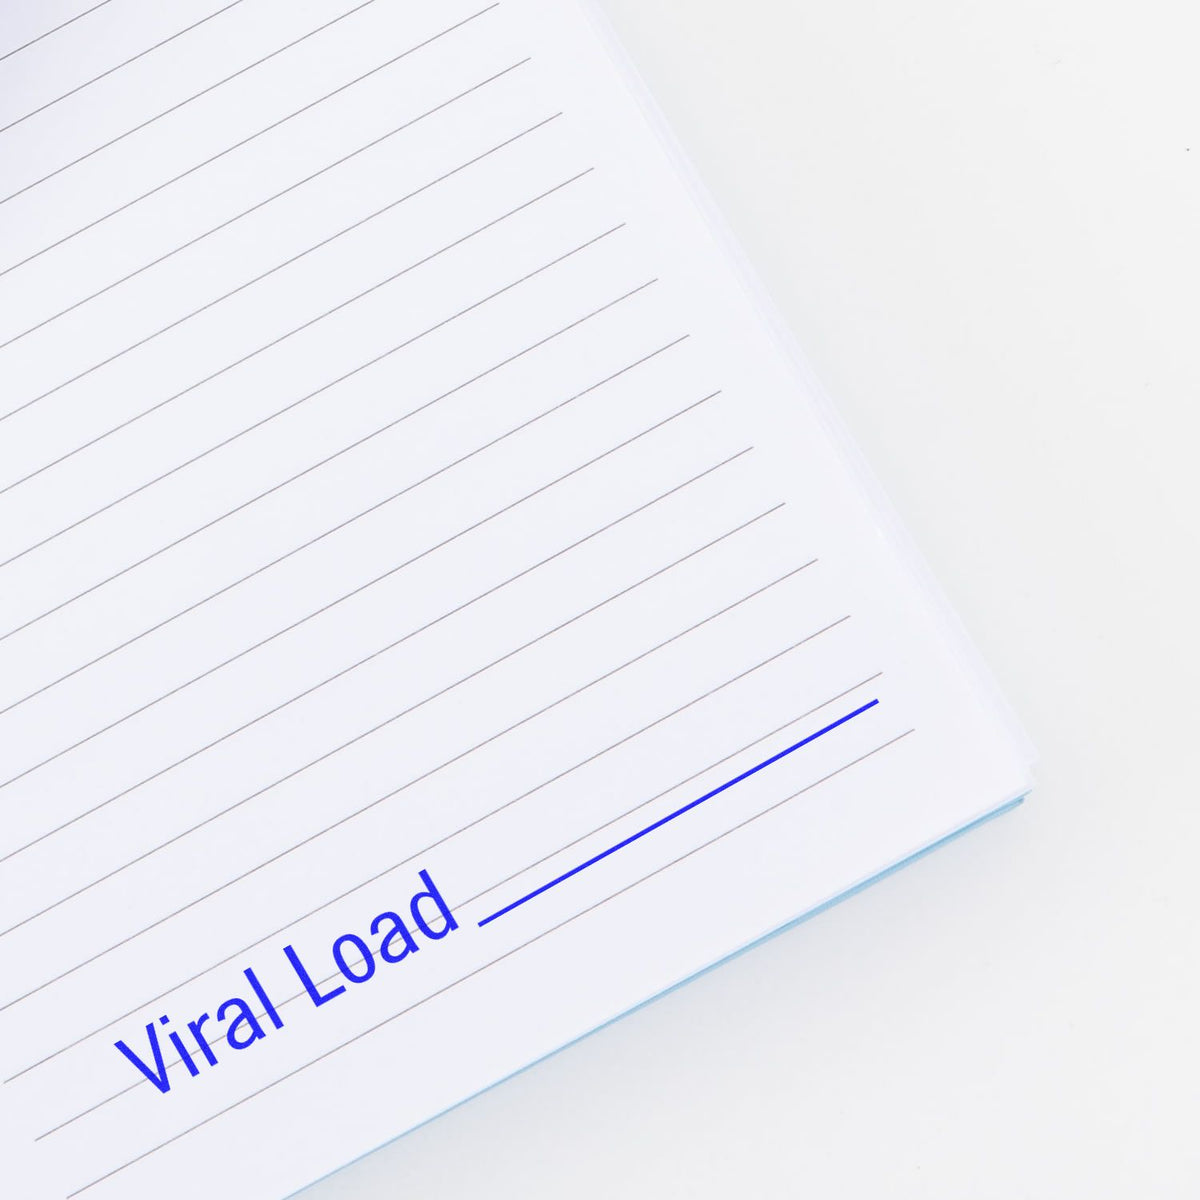 Large Viral Load Rubber Stamp In Use Photo